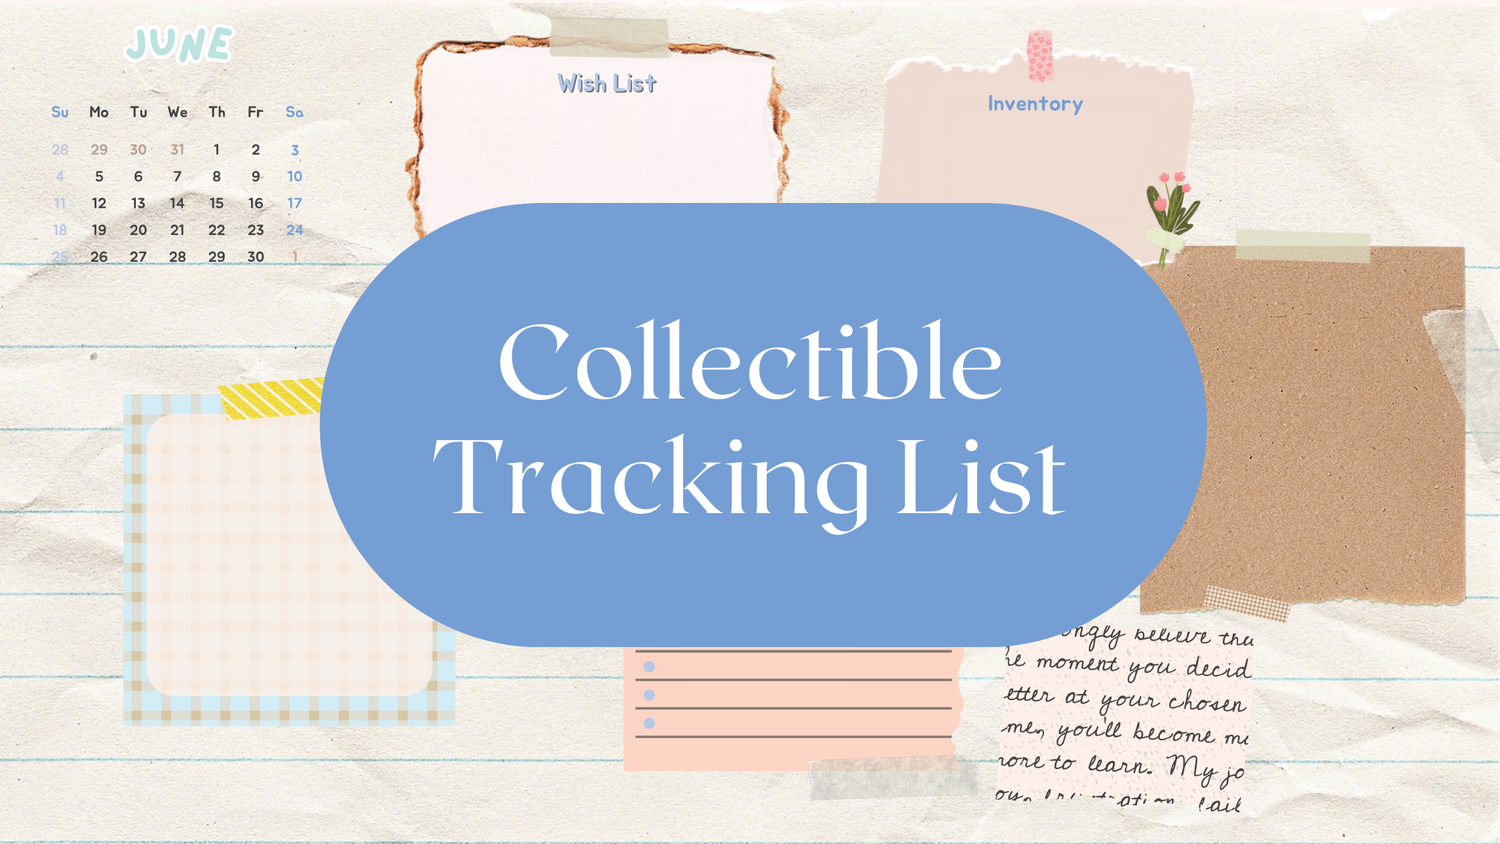 Collectible Tracking List